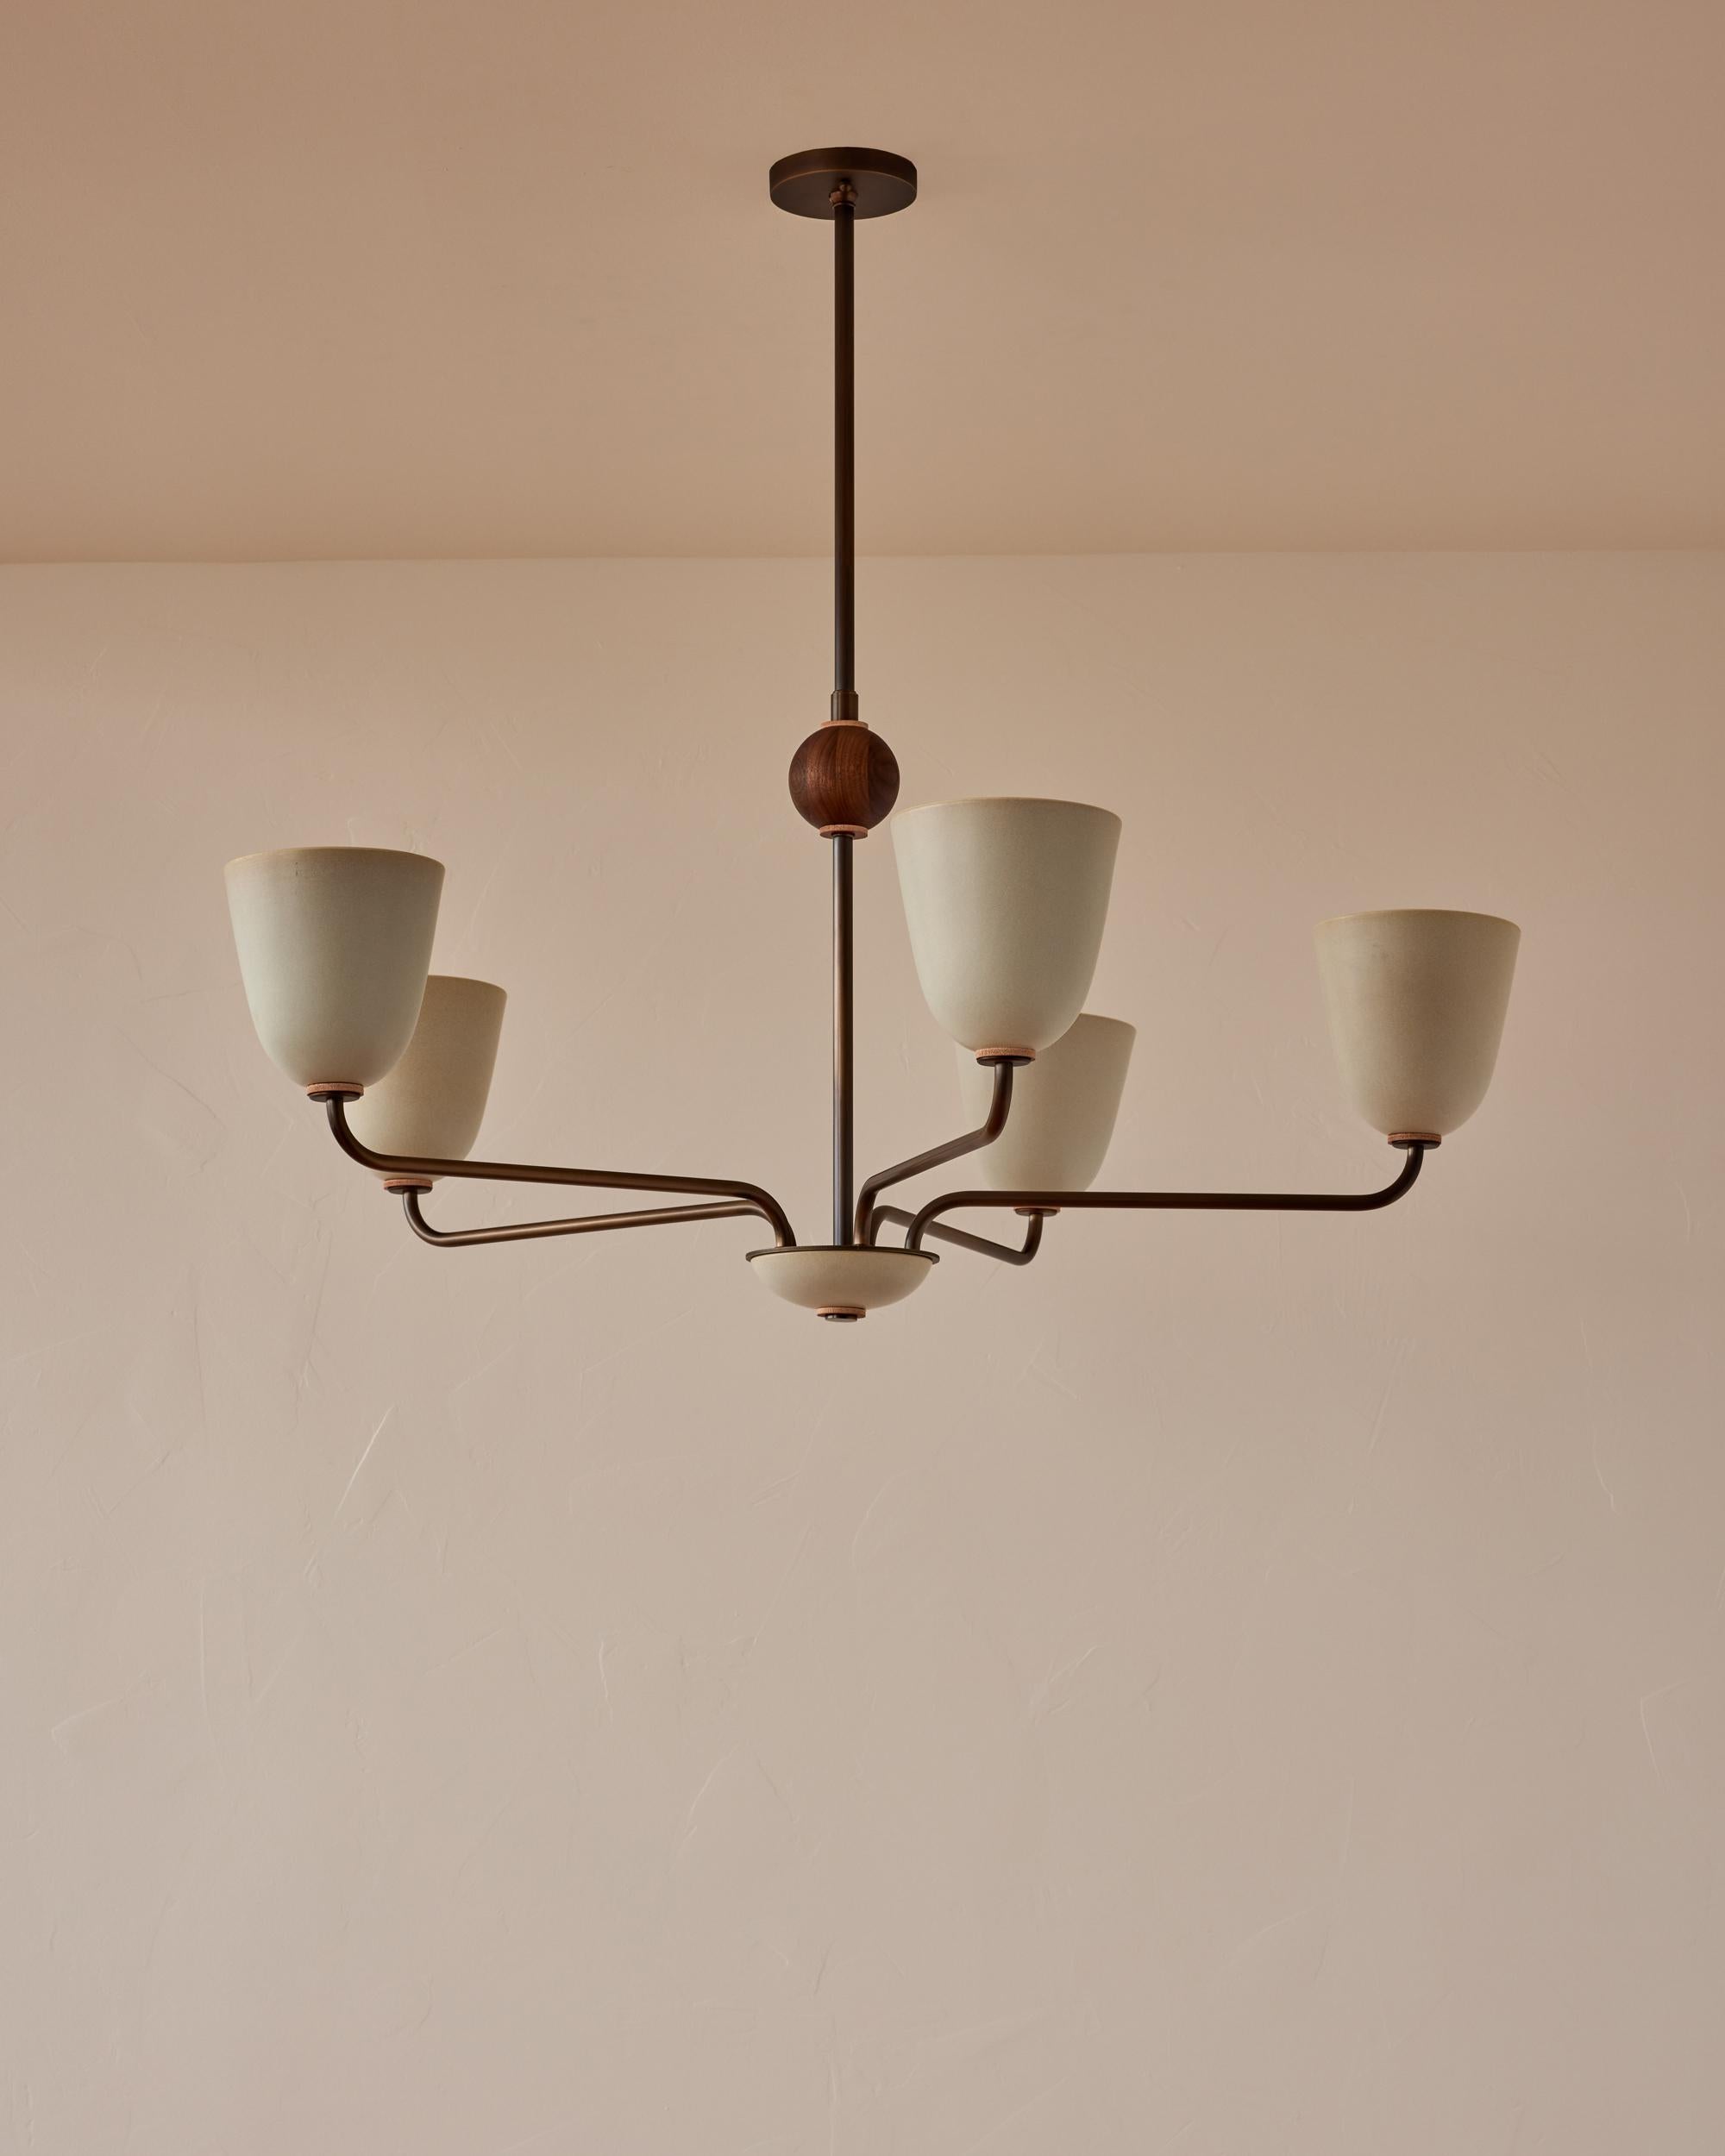 Five antique brass patina arms curve up from a ceramic cluster dish to three tall stoneware ceramic shades in Robin's Egg, a matte glaze with a tinge of blue. With a fixed black walnut orb and tan harness leather accents, this graceful chandelier